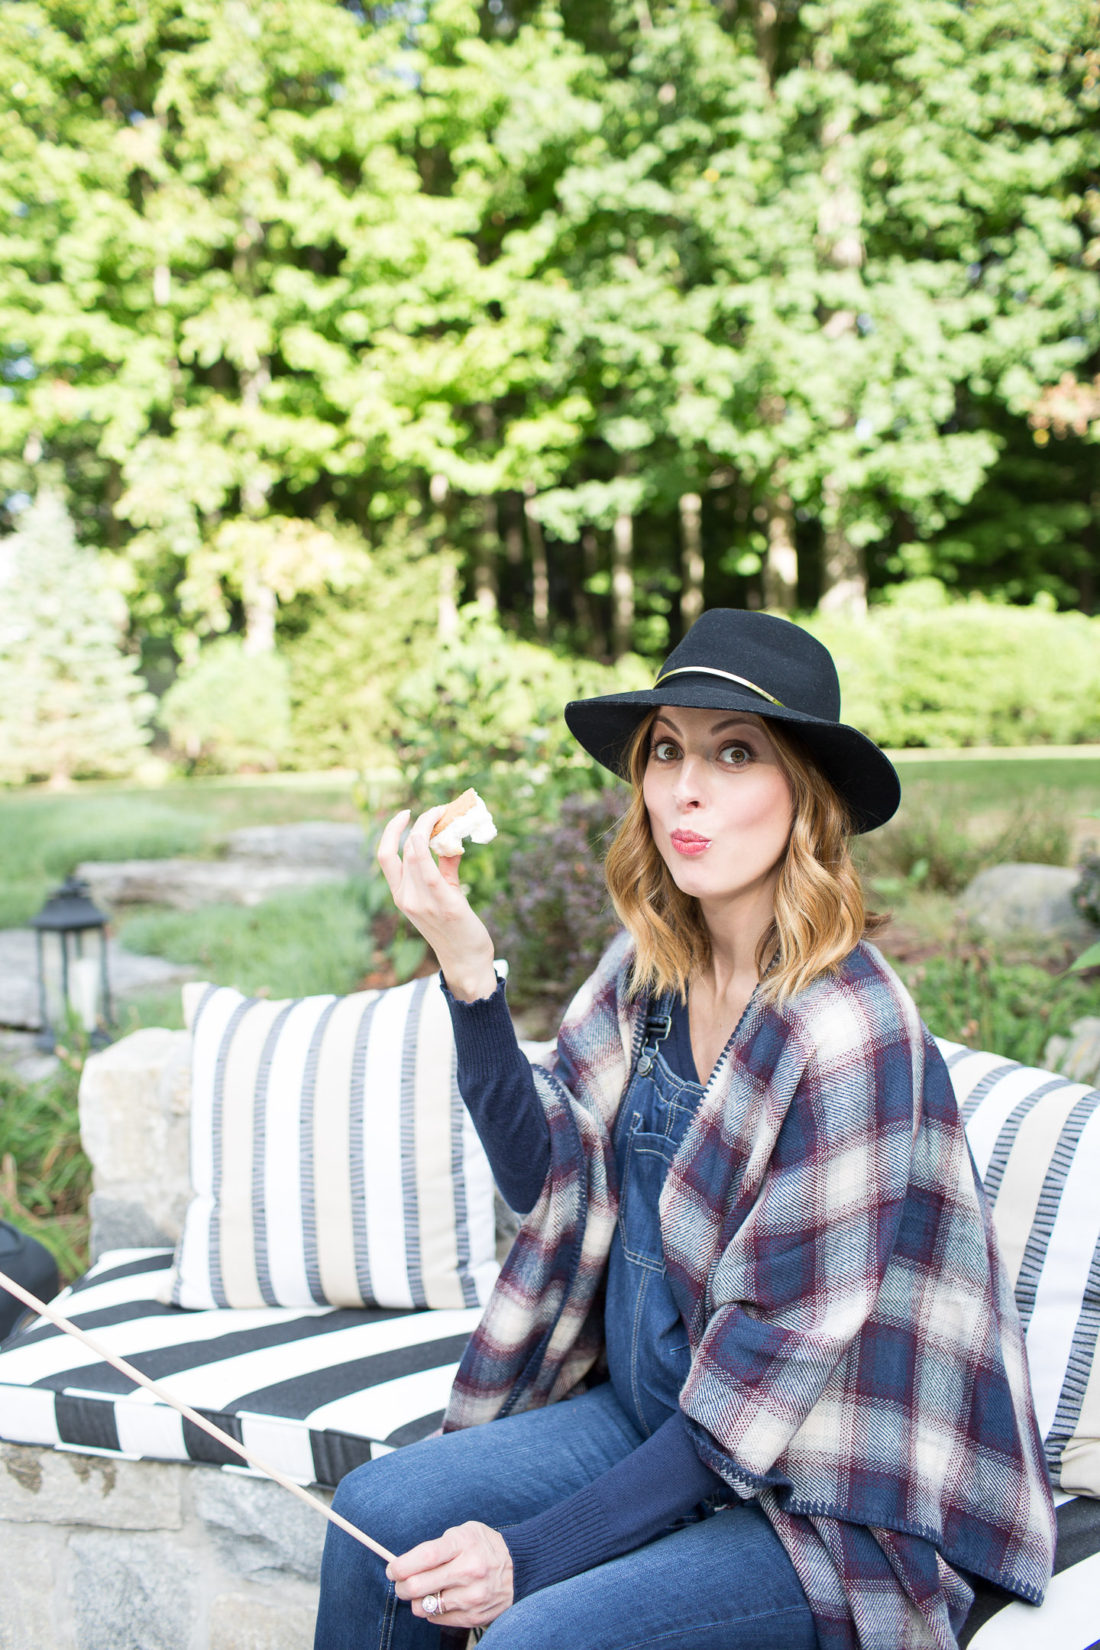 Eva Amurri Martino of lifestyle and motherhood blog Happily Eva After biting in to a S'more at her fire pit while wearing a plaid poncho and navy blue felt hat at 38 weeks pregnant